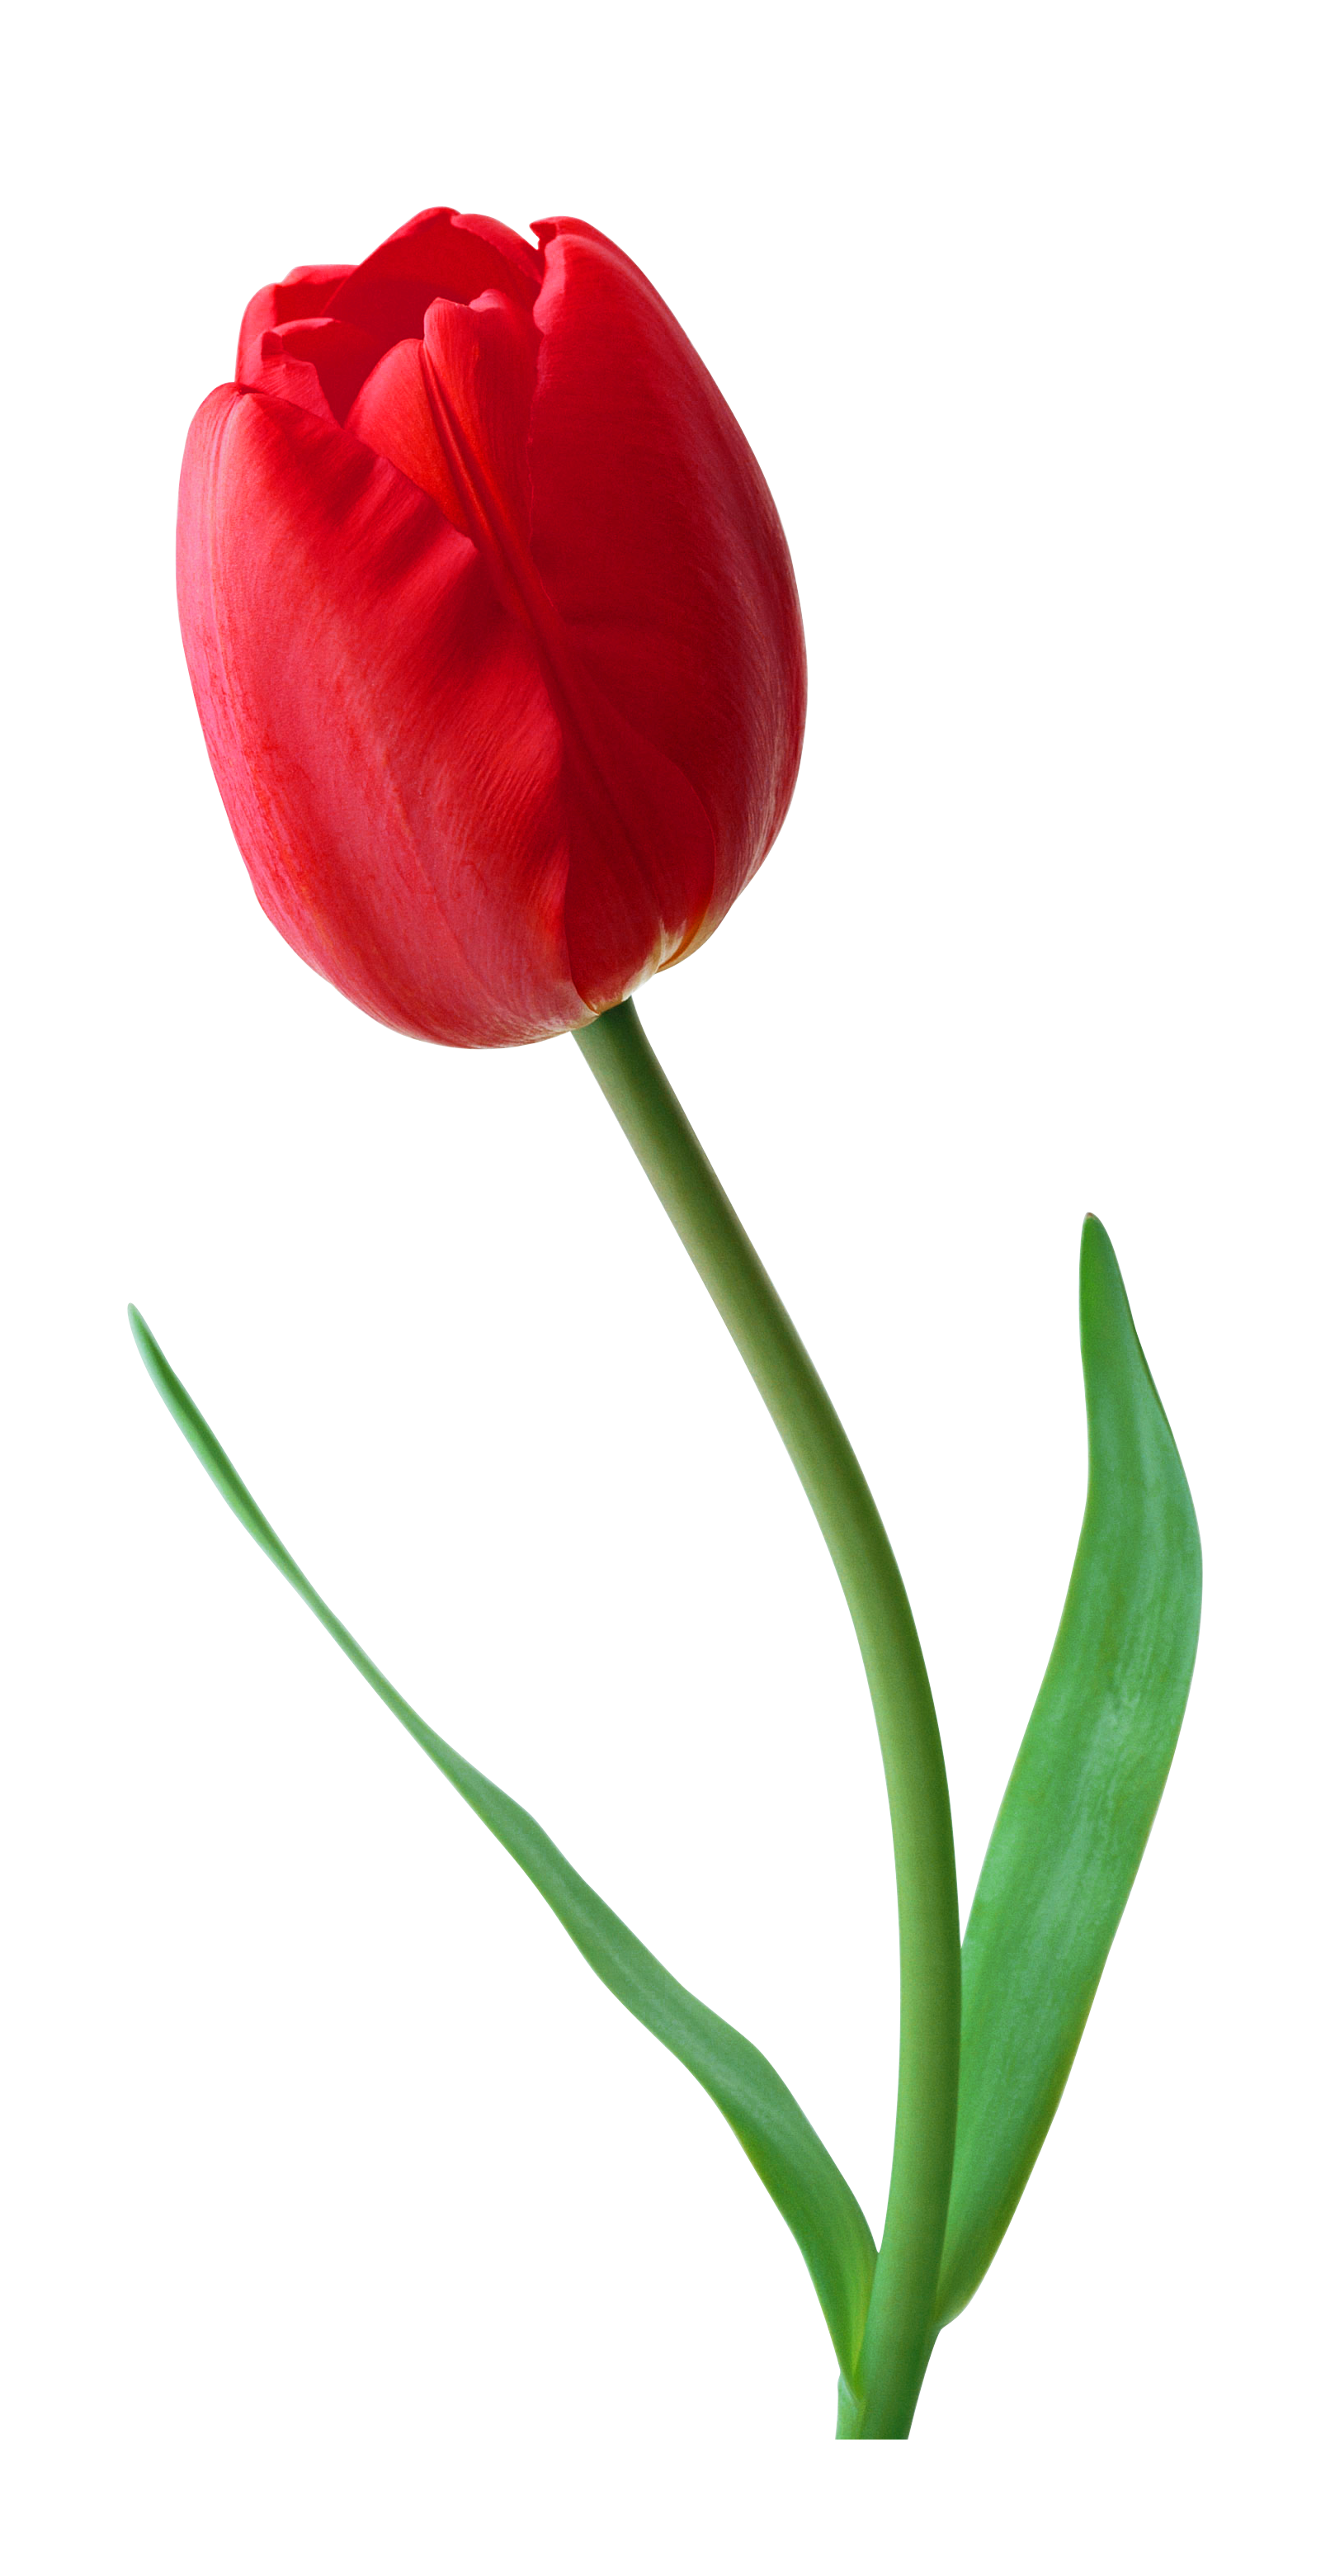 Tulip Flower PNG Image in High Definition - Tulip Png